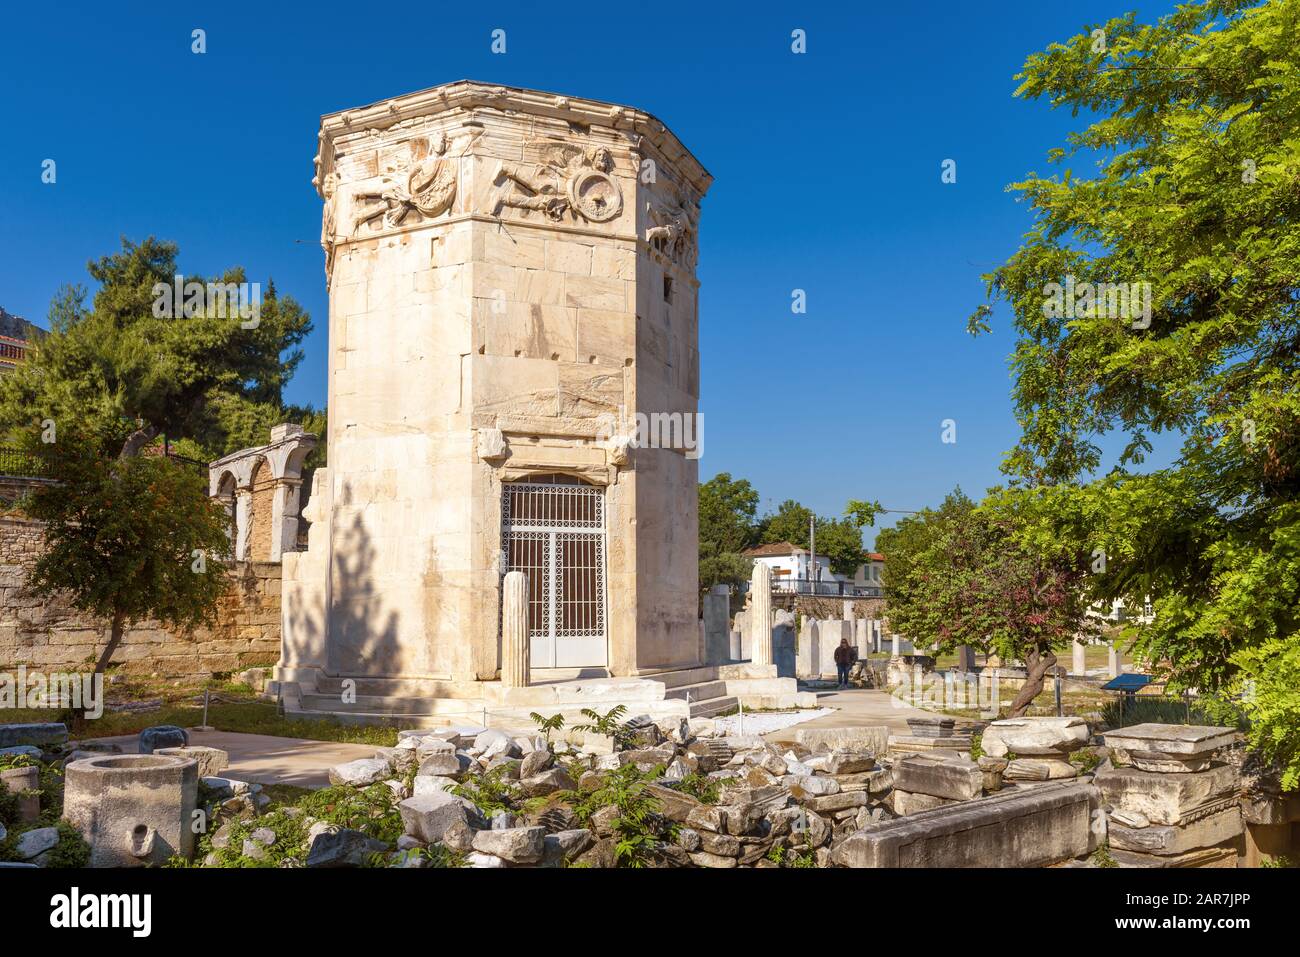 Tower of Winds or Aerides on Roman Agora, Athens, Greece. It is one of the main landmarks of Athens. Scenery of Ancient Greek ruins in Athens centre a Stock Photo